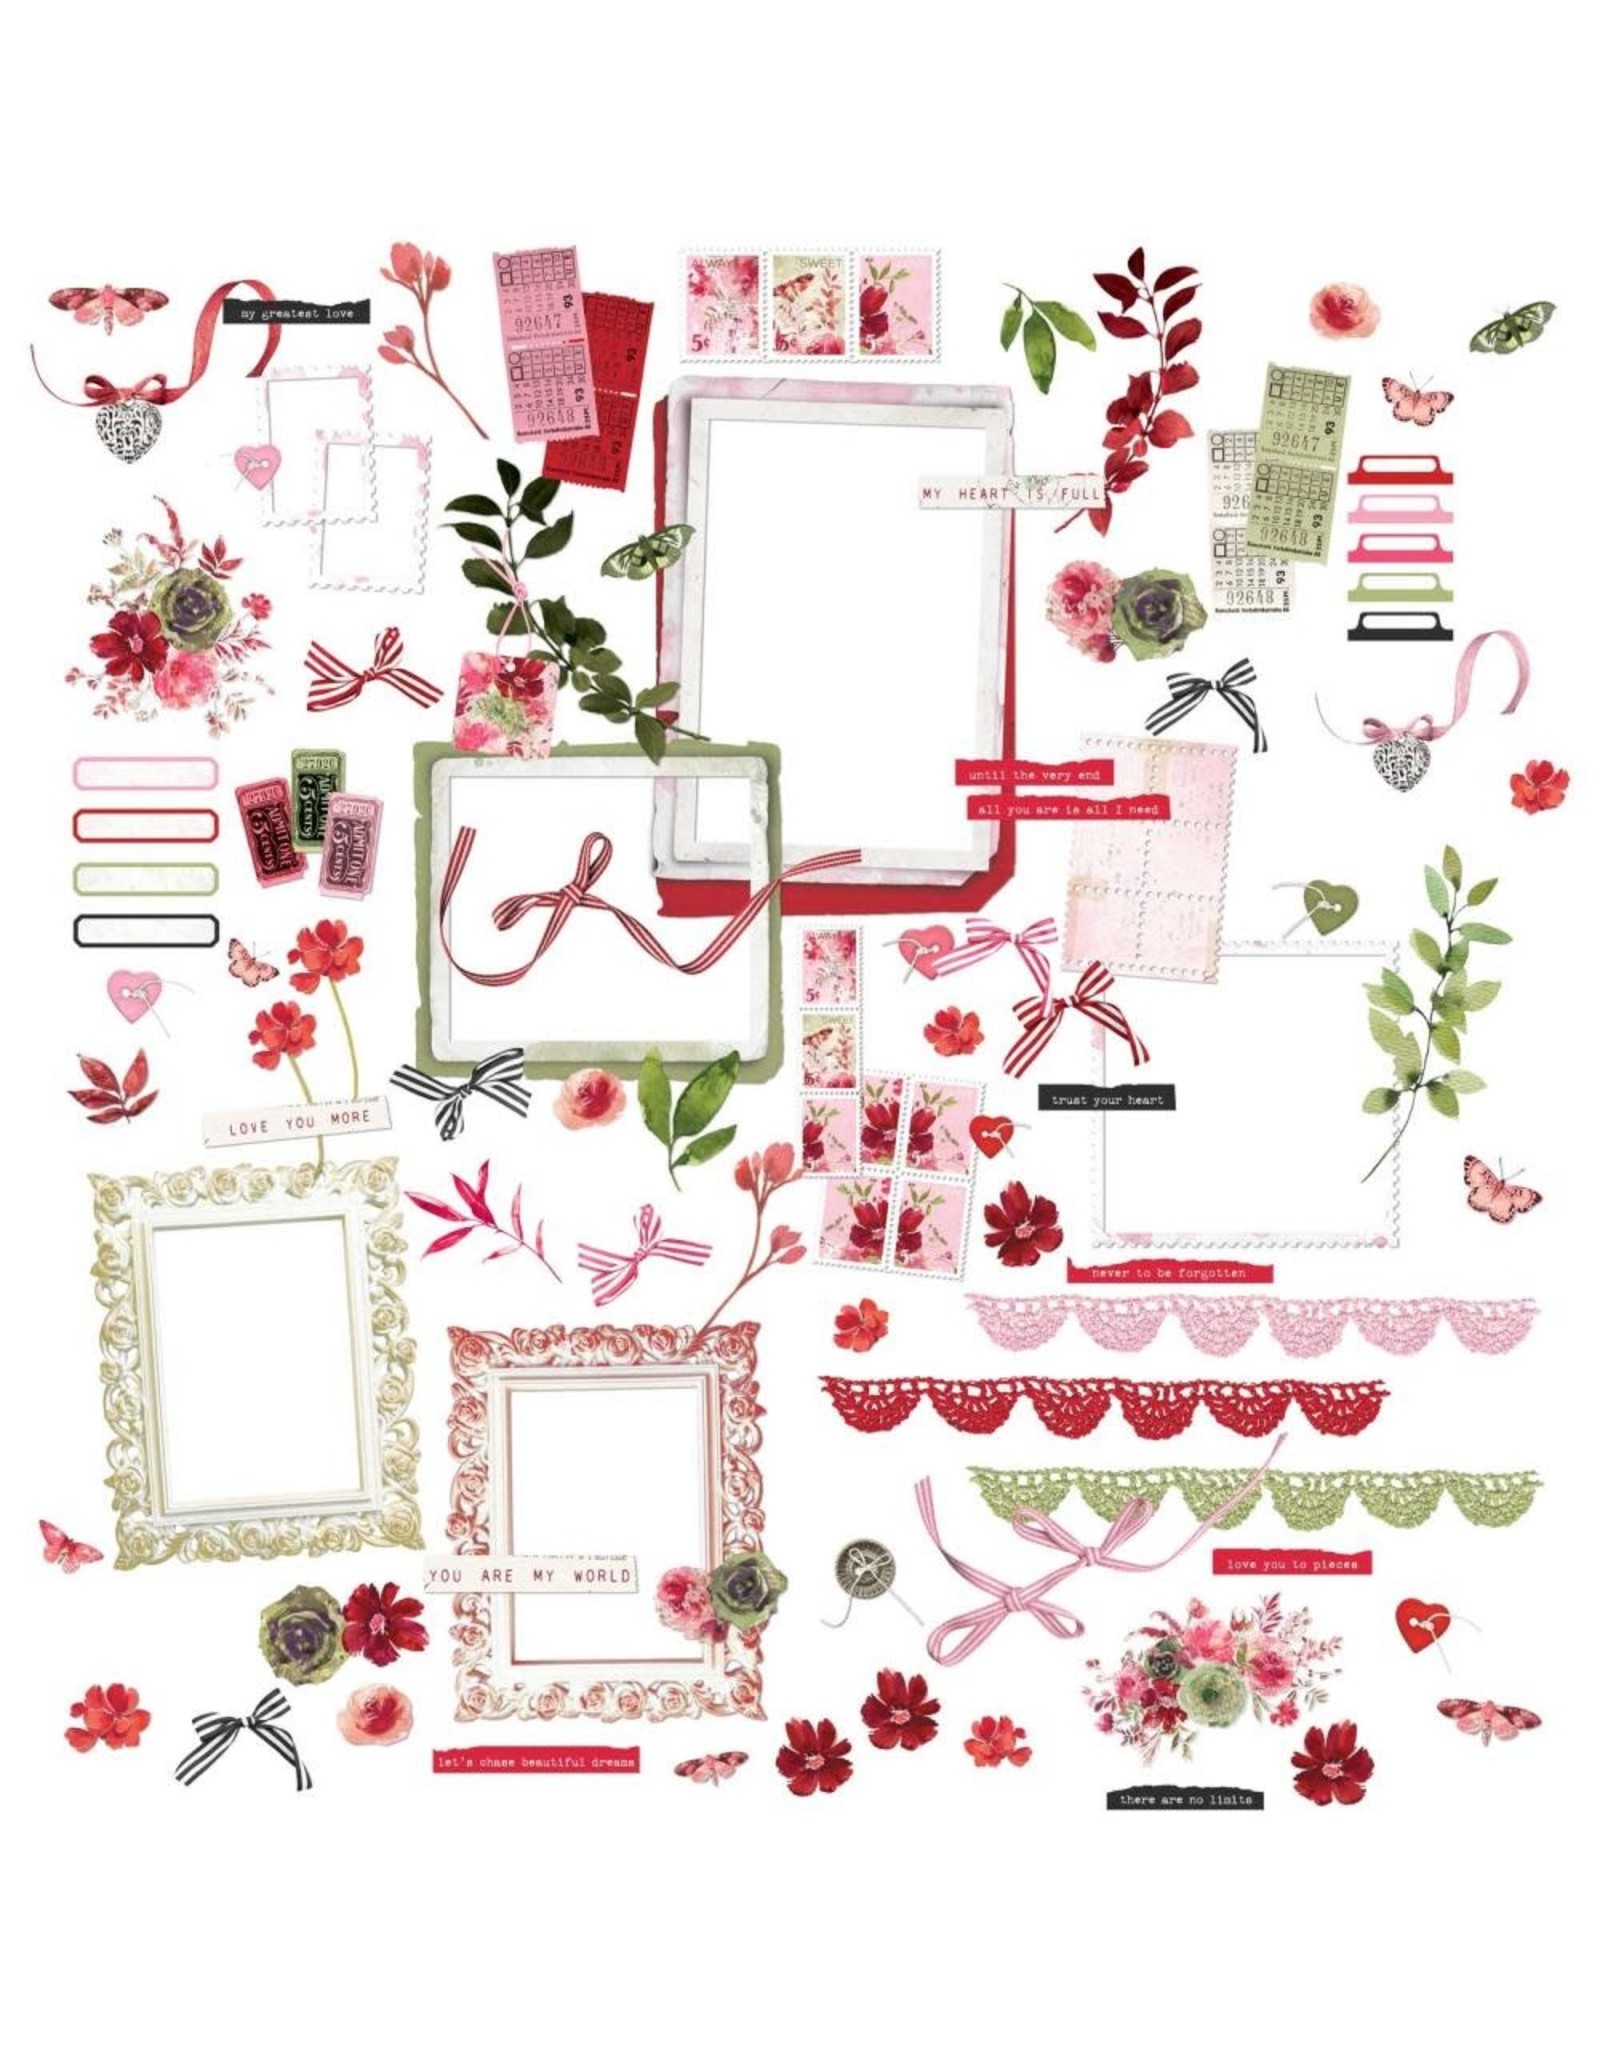 49 AND MARKET 49 AND MARKET ARTOPTIONS ROUGE 6x12 LASER CUT ELEMENTS  97/PK